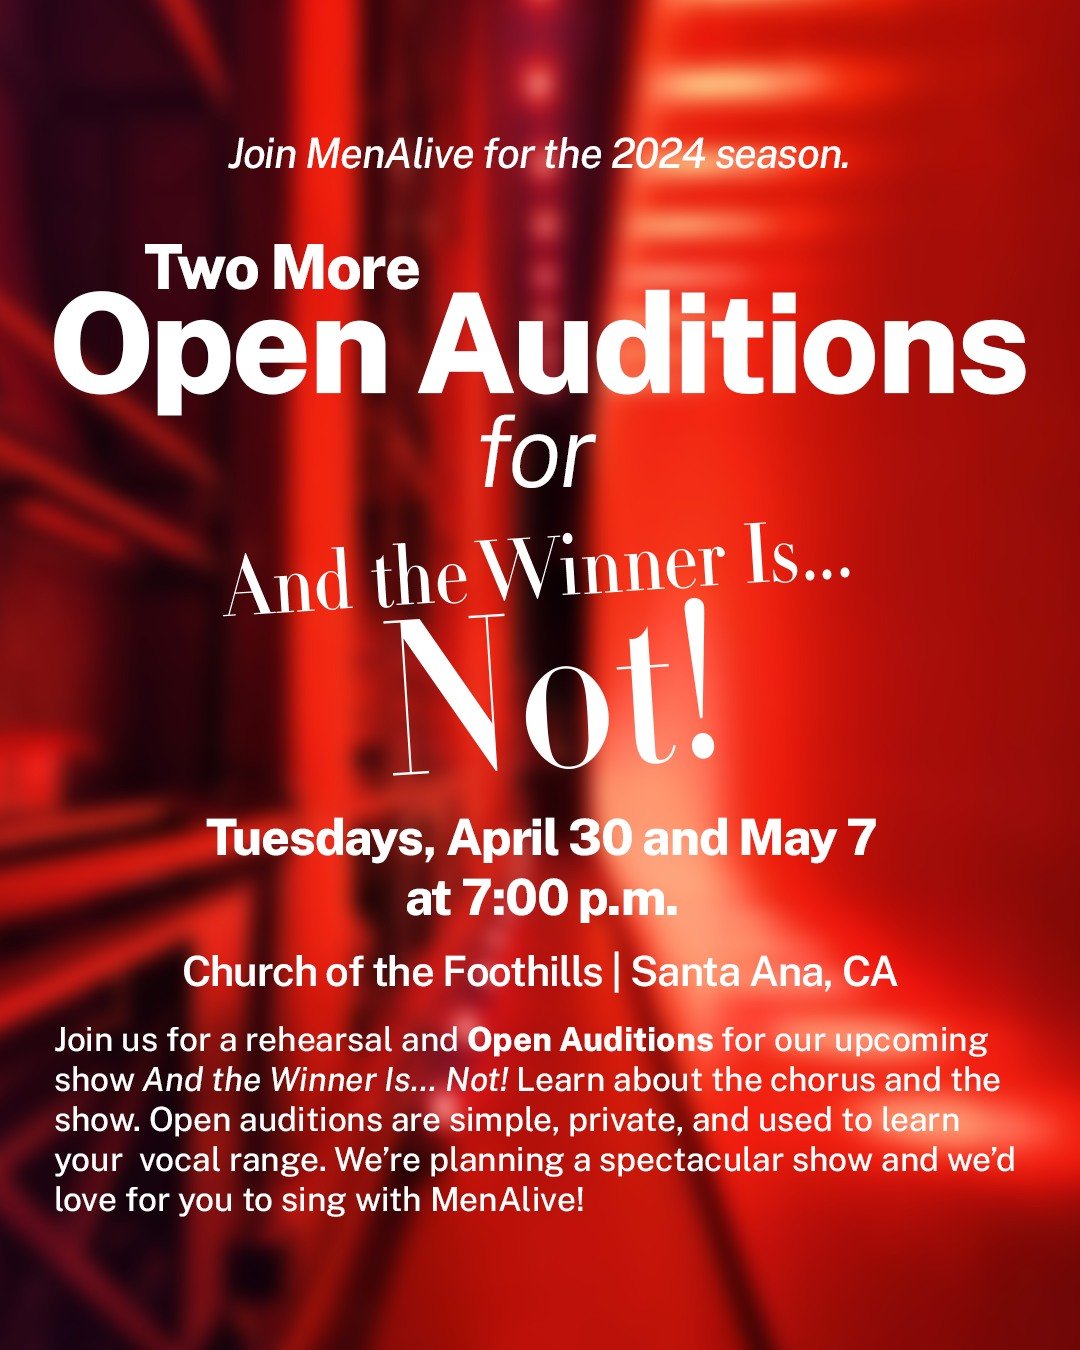 Join us tomorrow and next Tuesday for rehearsal and Open Auditions for our upcoming show, And the Winner Is... Not! Learn about the chorus and the show. Open auditions are simple, private, and used to learn your vocal range. We&rsquo;re planning a sp